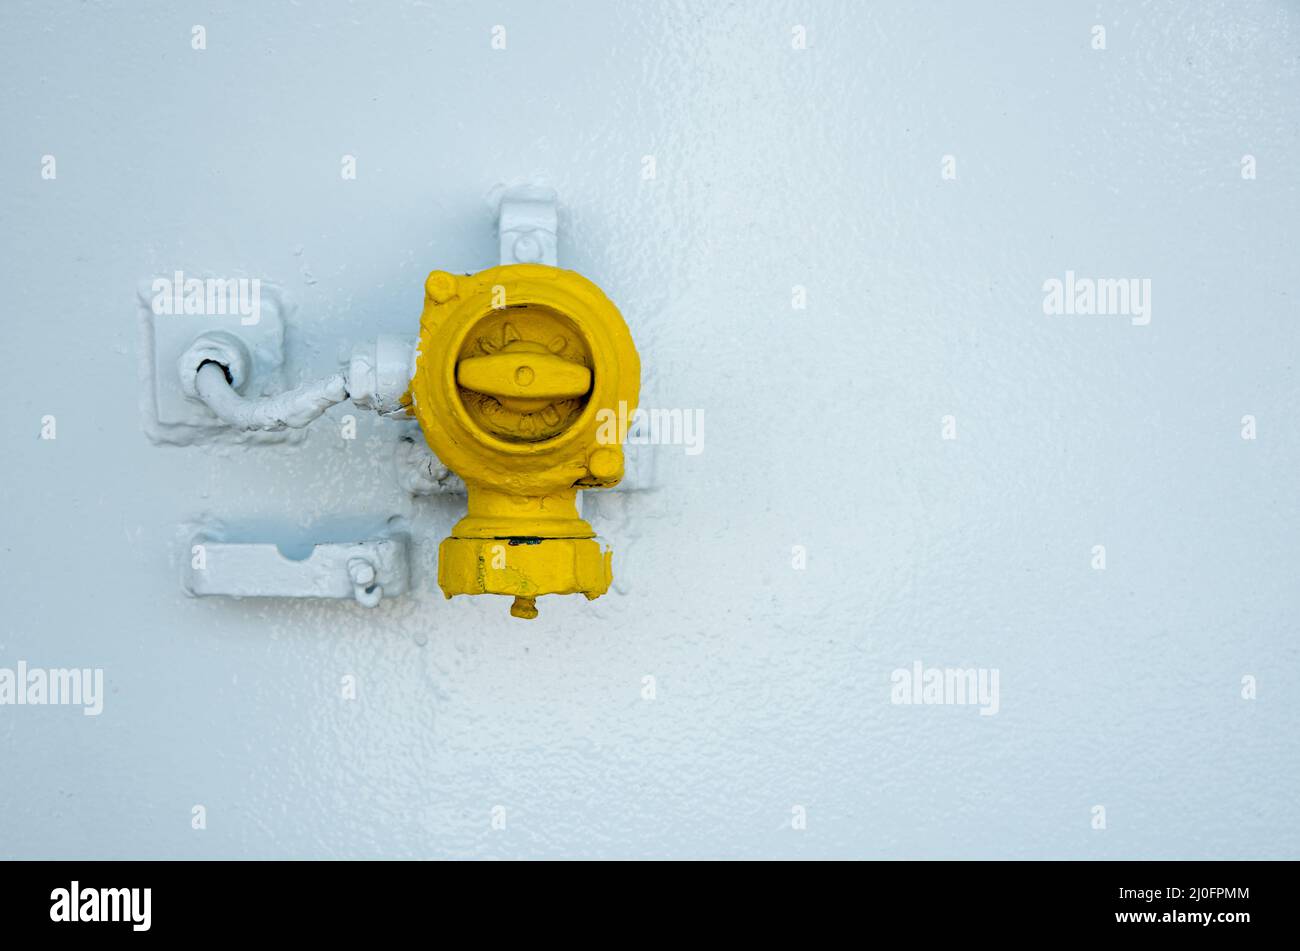 Yellow control  industrial switch on a white metallic surface Stock Photo